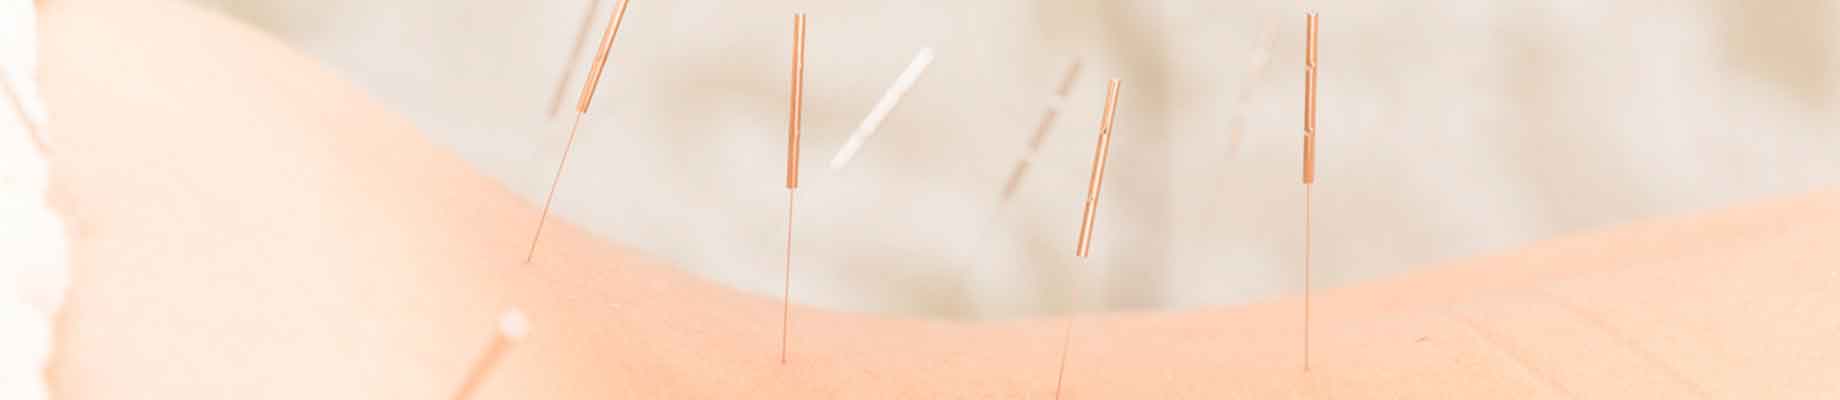 Acupuncture Plymouth | Acupuncture for Injury Plymouth | Acupuncturist Plymouth